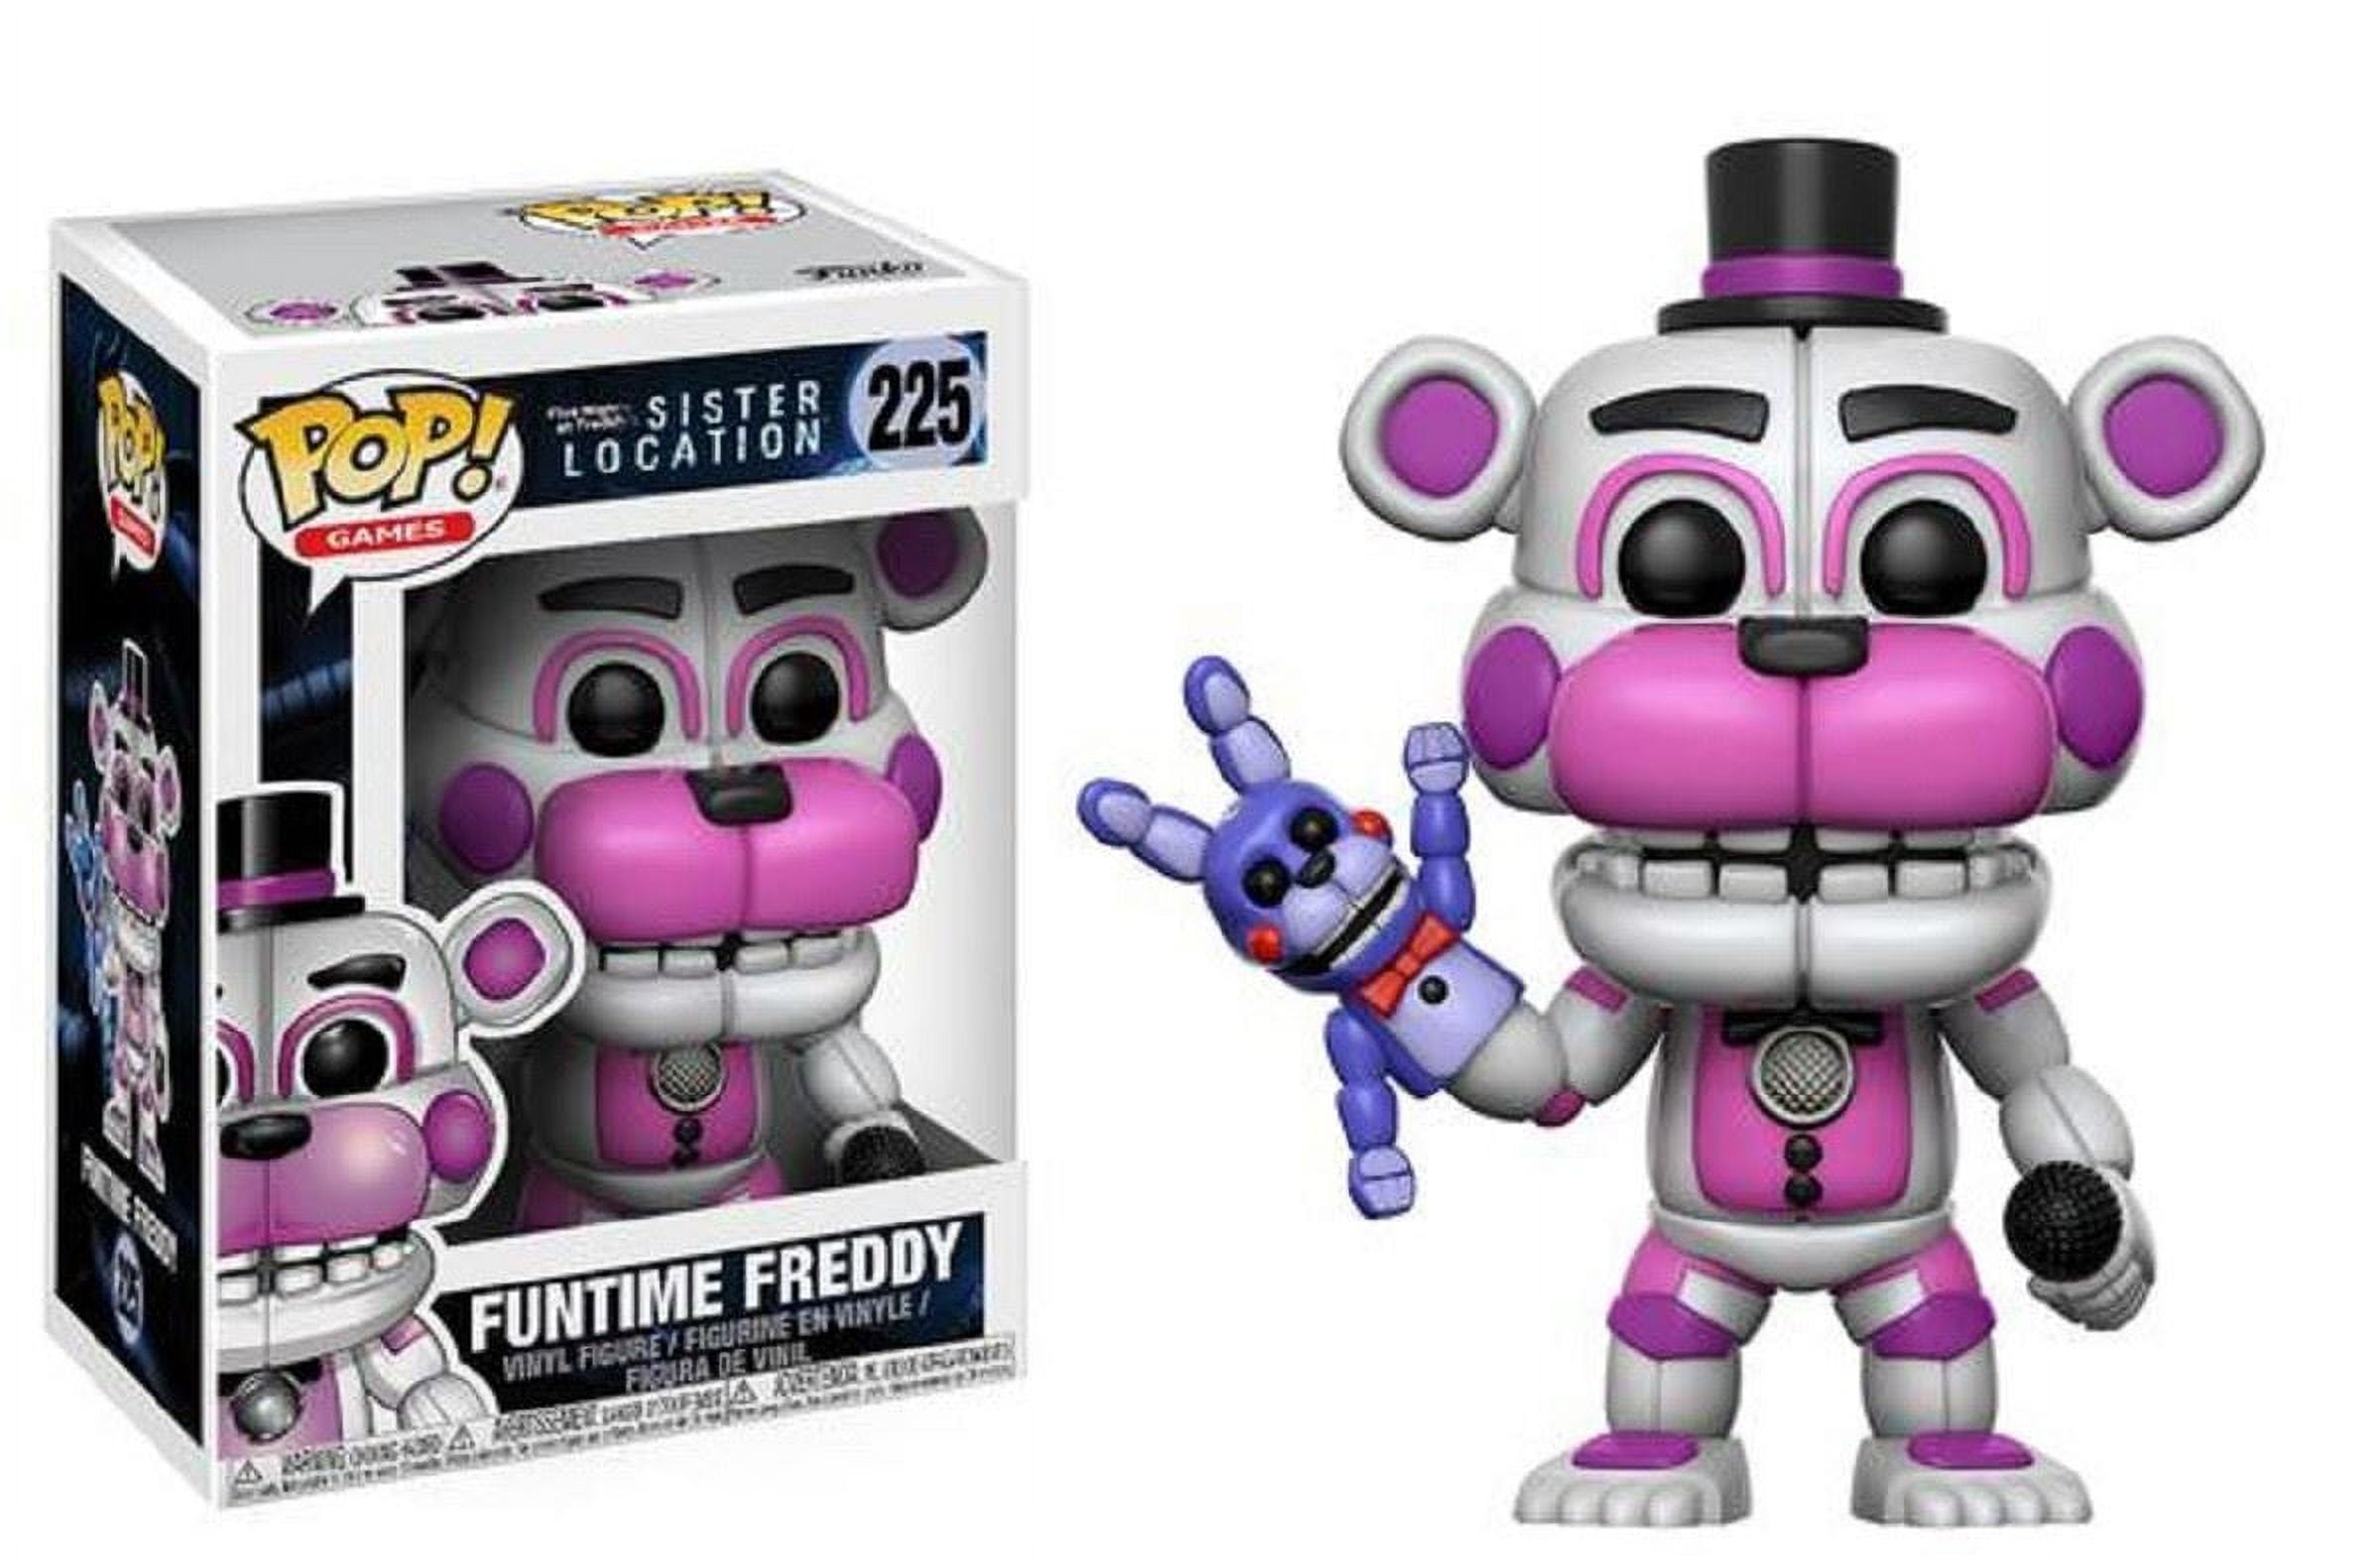  Funko 2 Action Figure Five Nights at Freddy's Sister Location  Set 2 Action Figure : Toys & Games